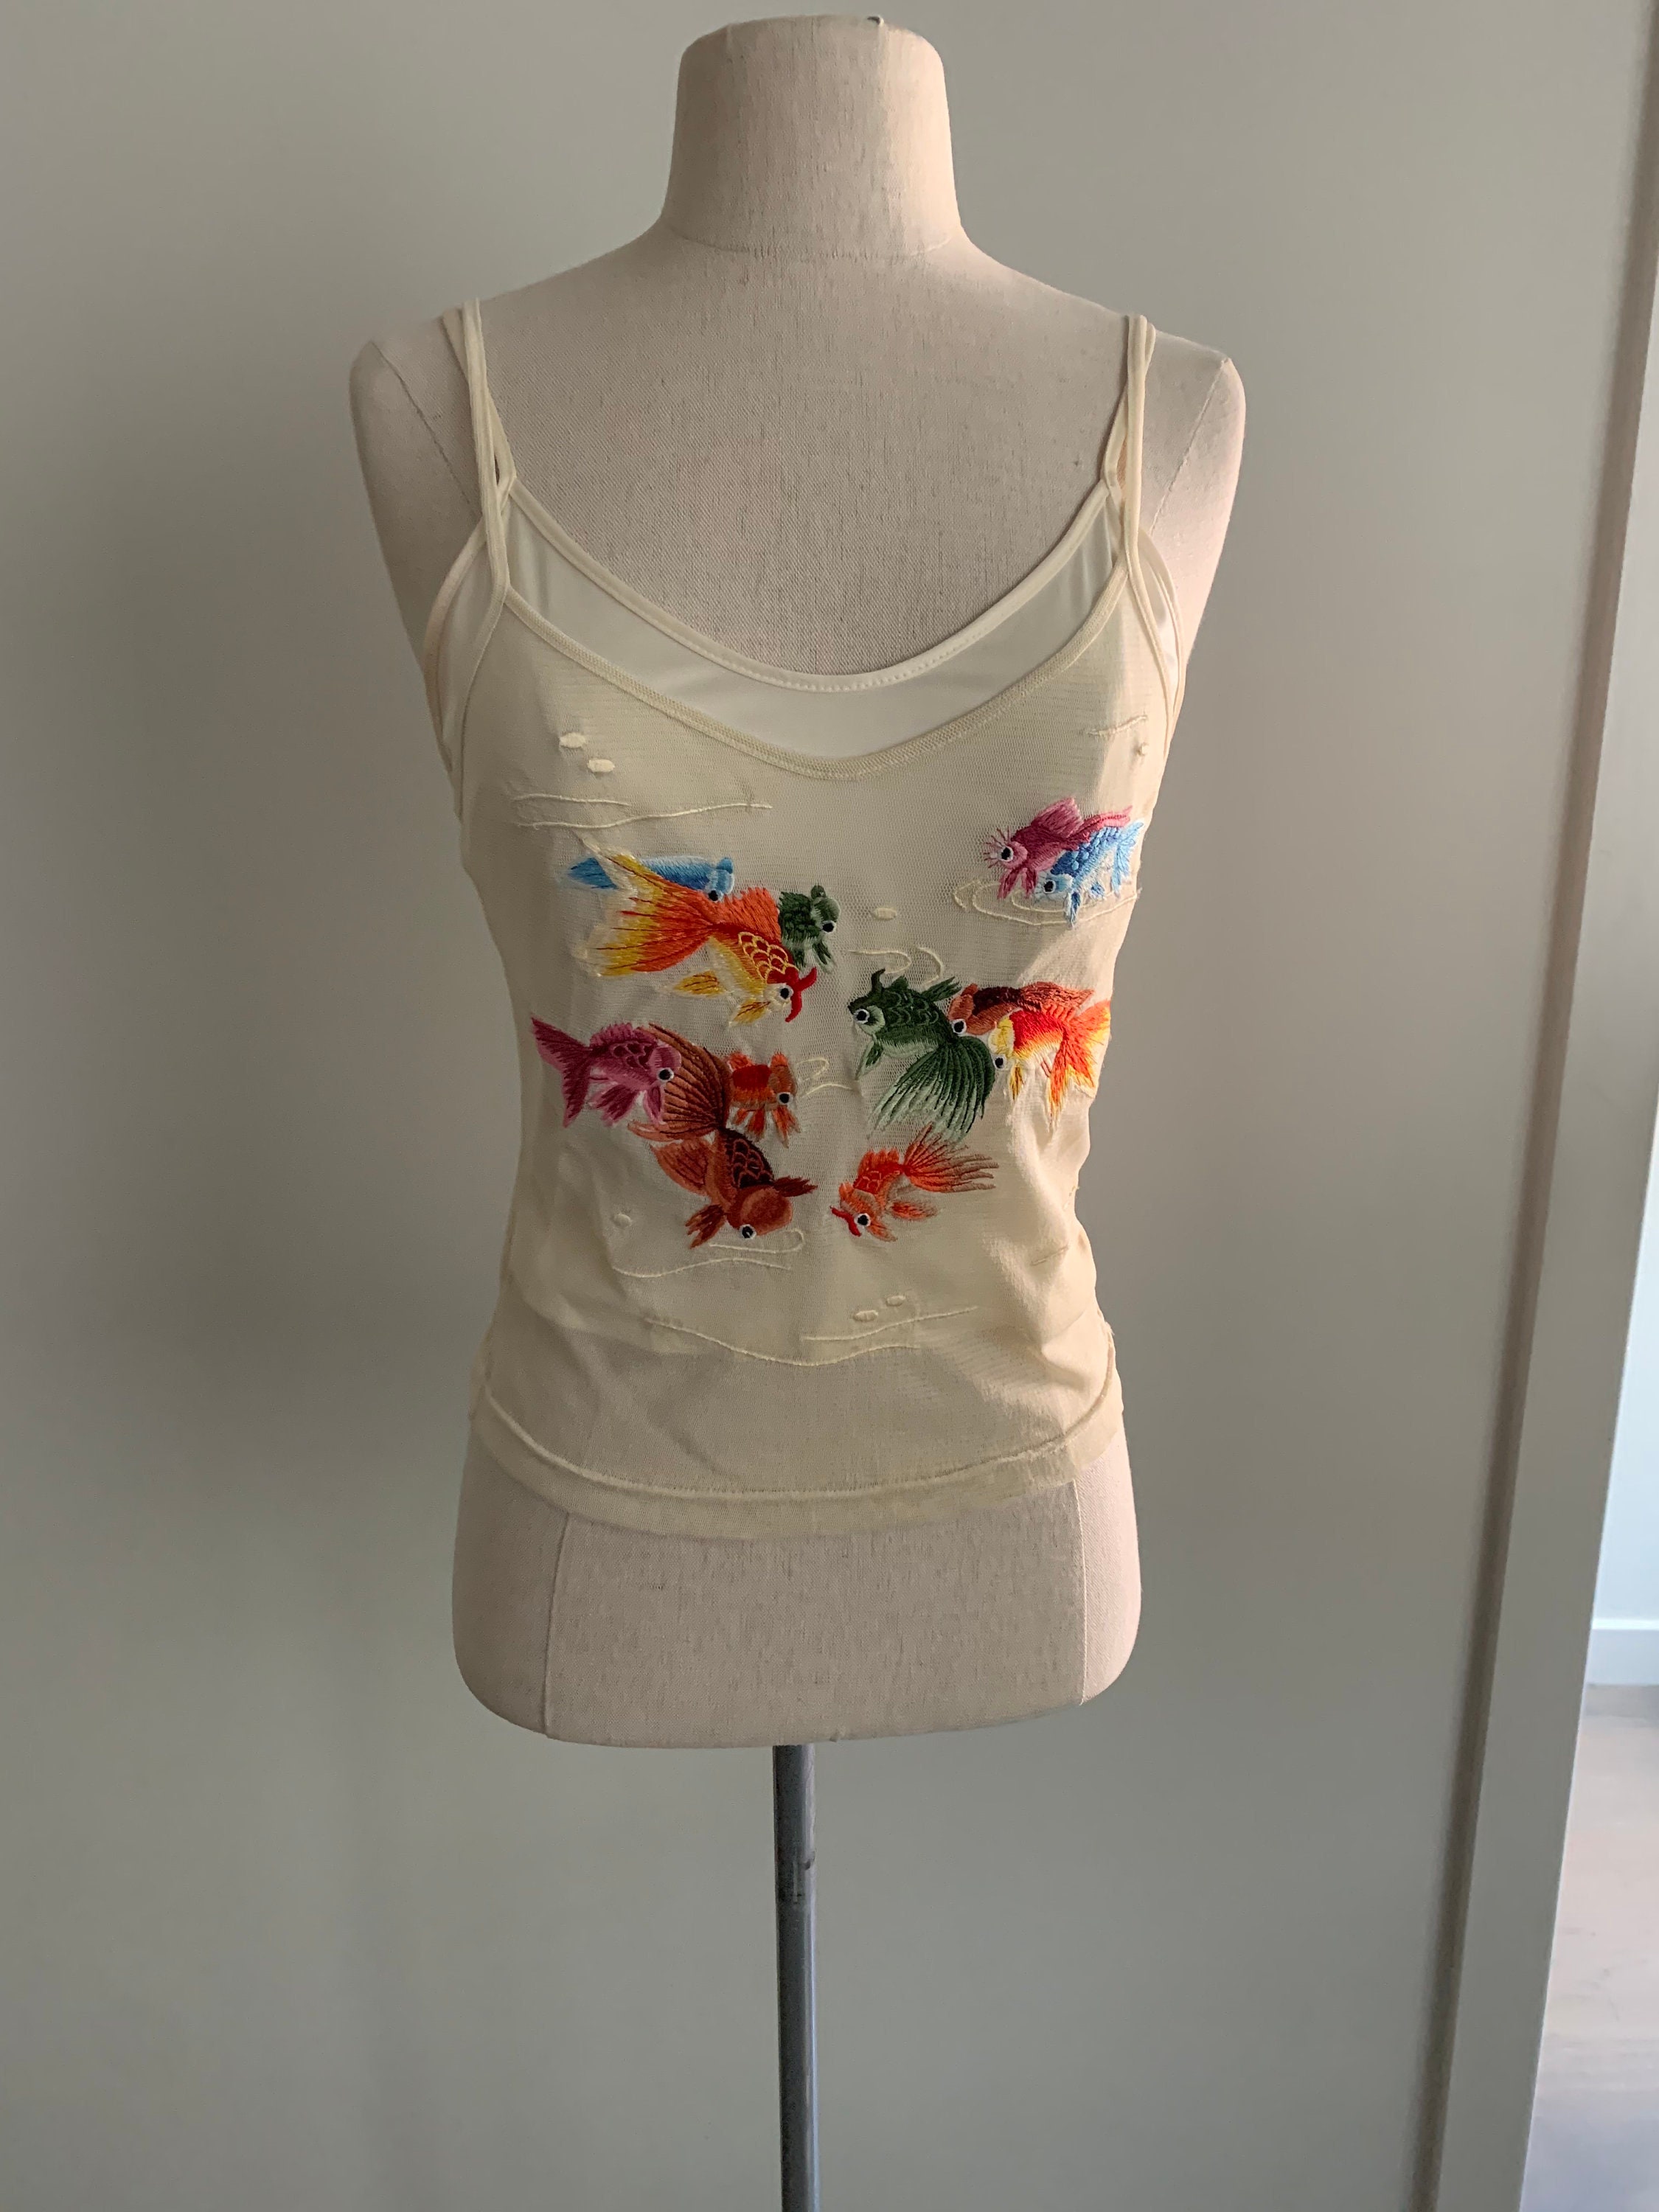 Vivienne Tam Fish Embroidered Cream Mesh Tank With Cami-size XS - Etsy